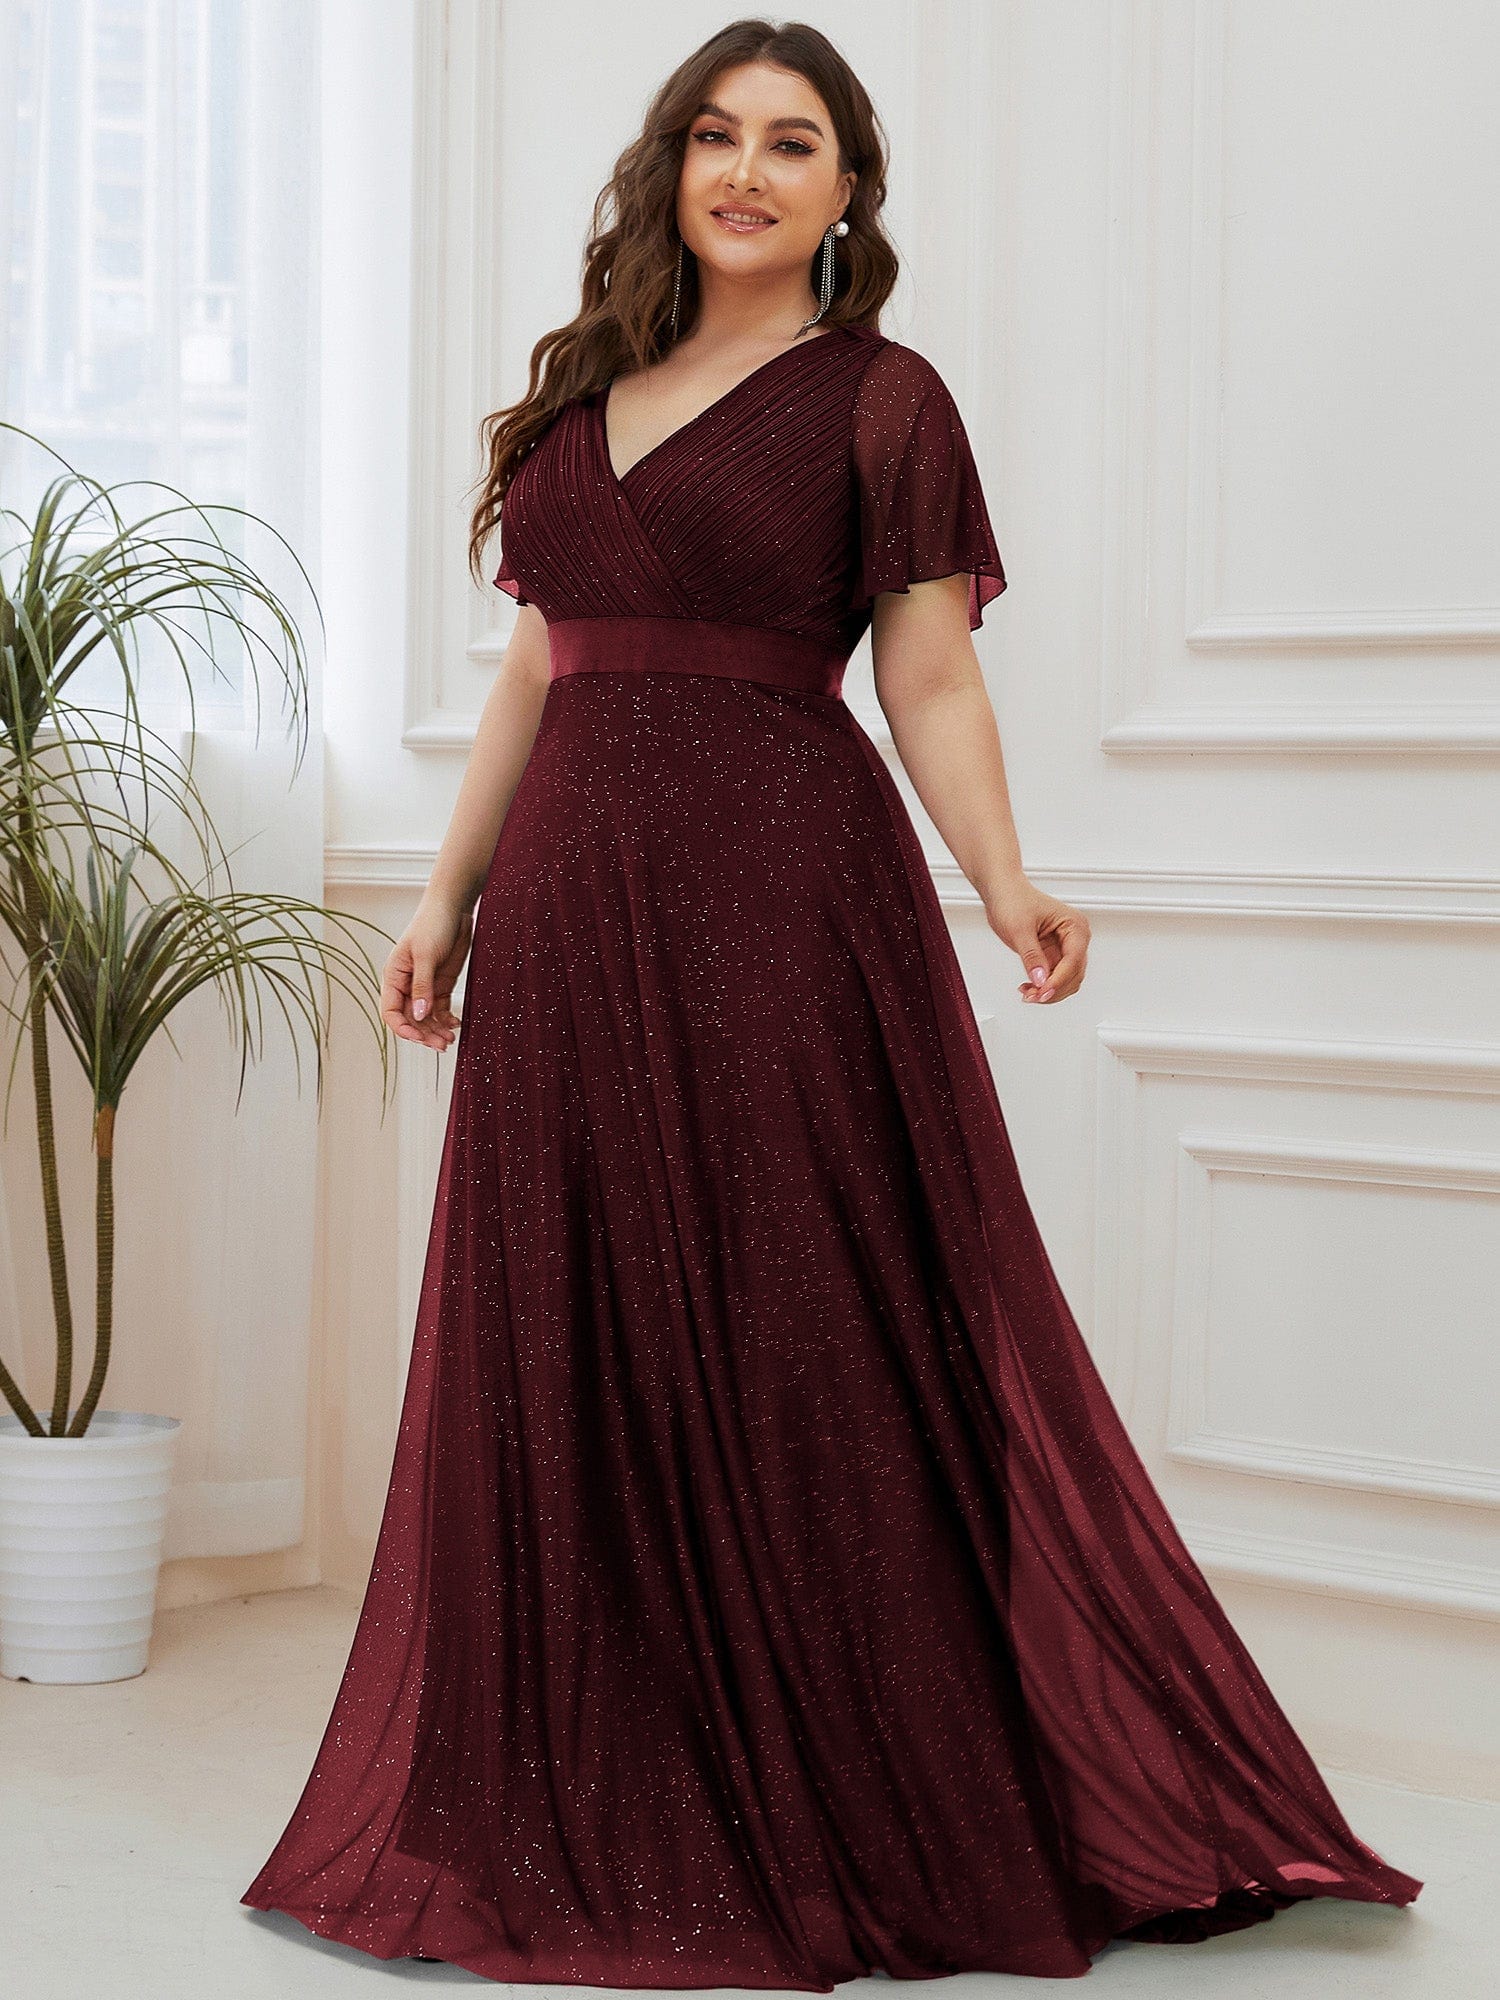 Plus Size Formal Dress Collection From Everpretty